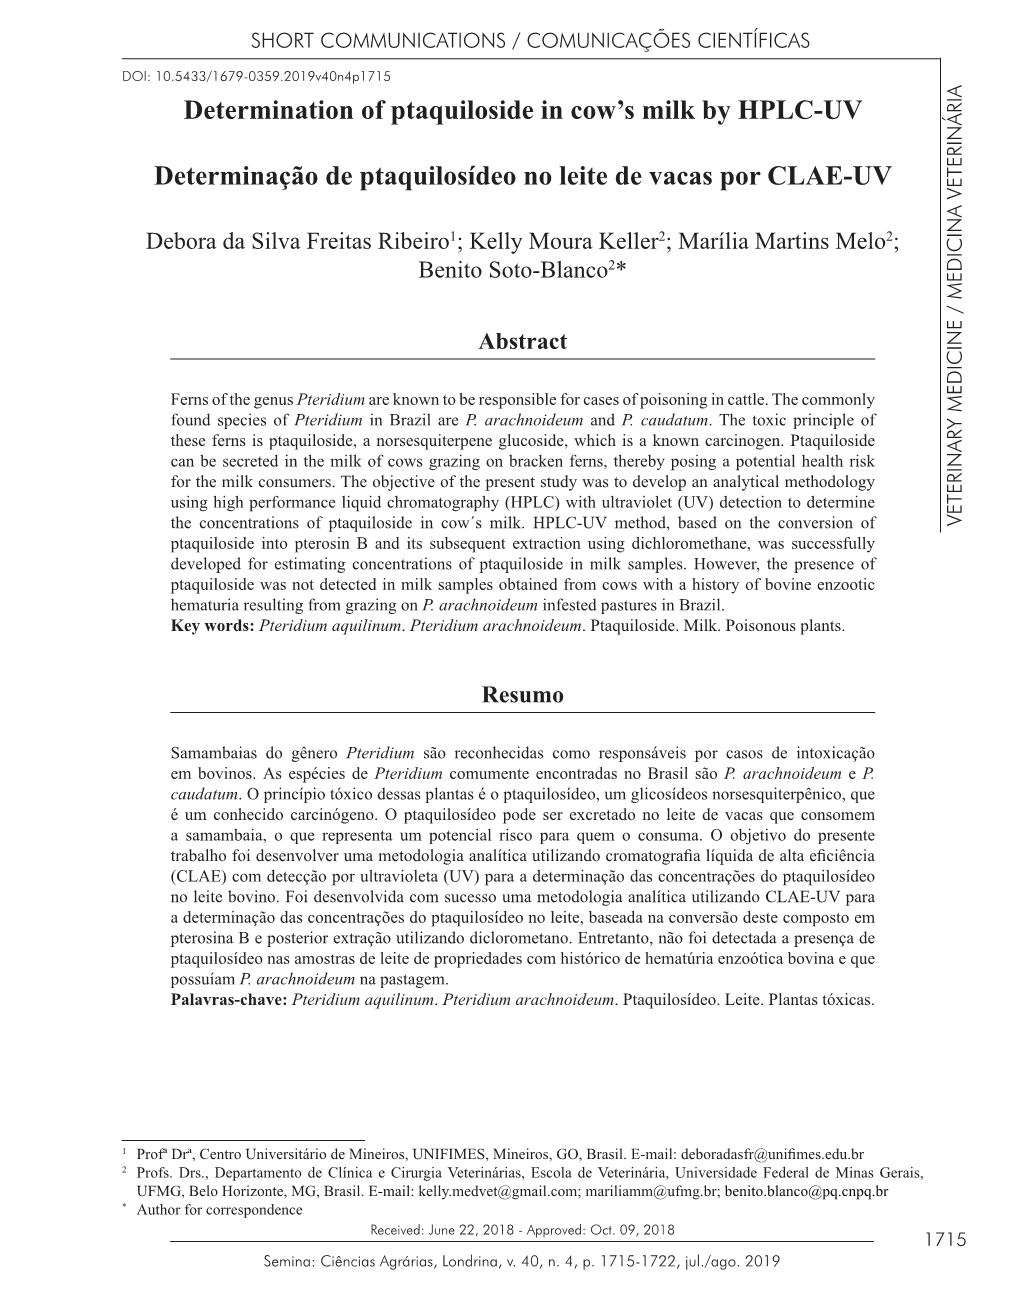 Determination of Ptaquiloside in Cow's Milk by HPLC-UV